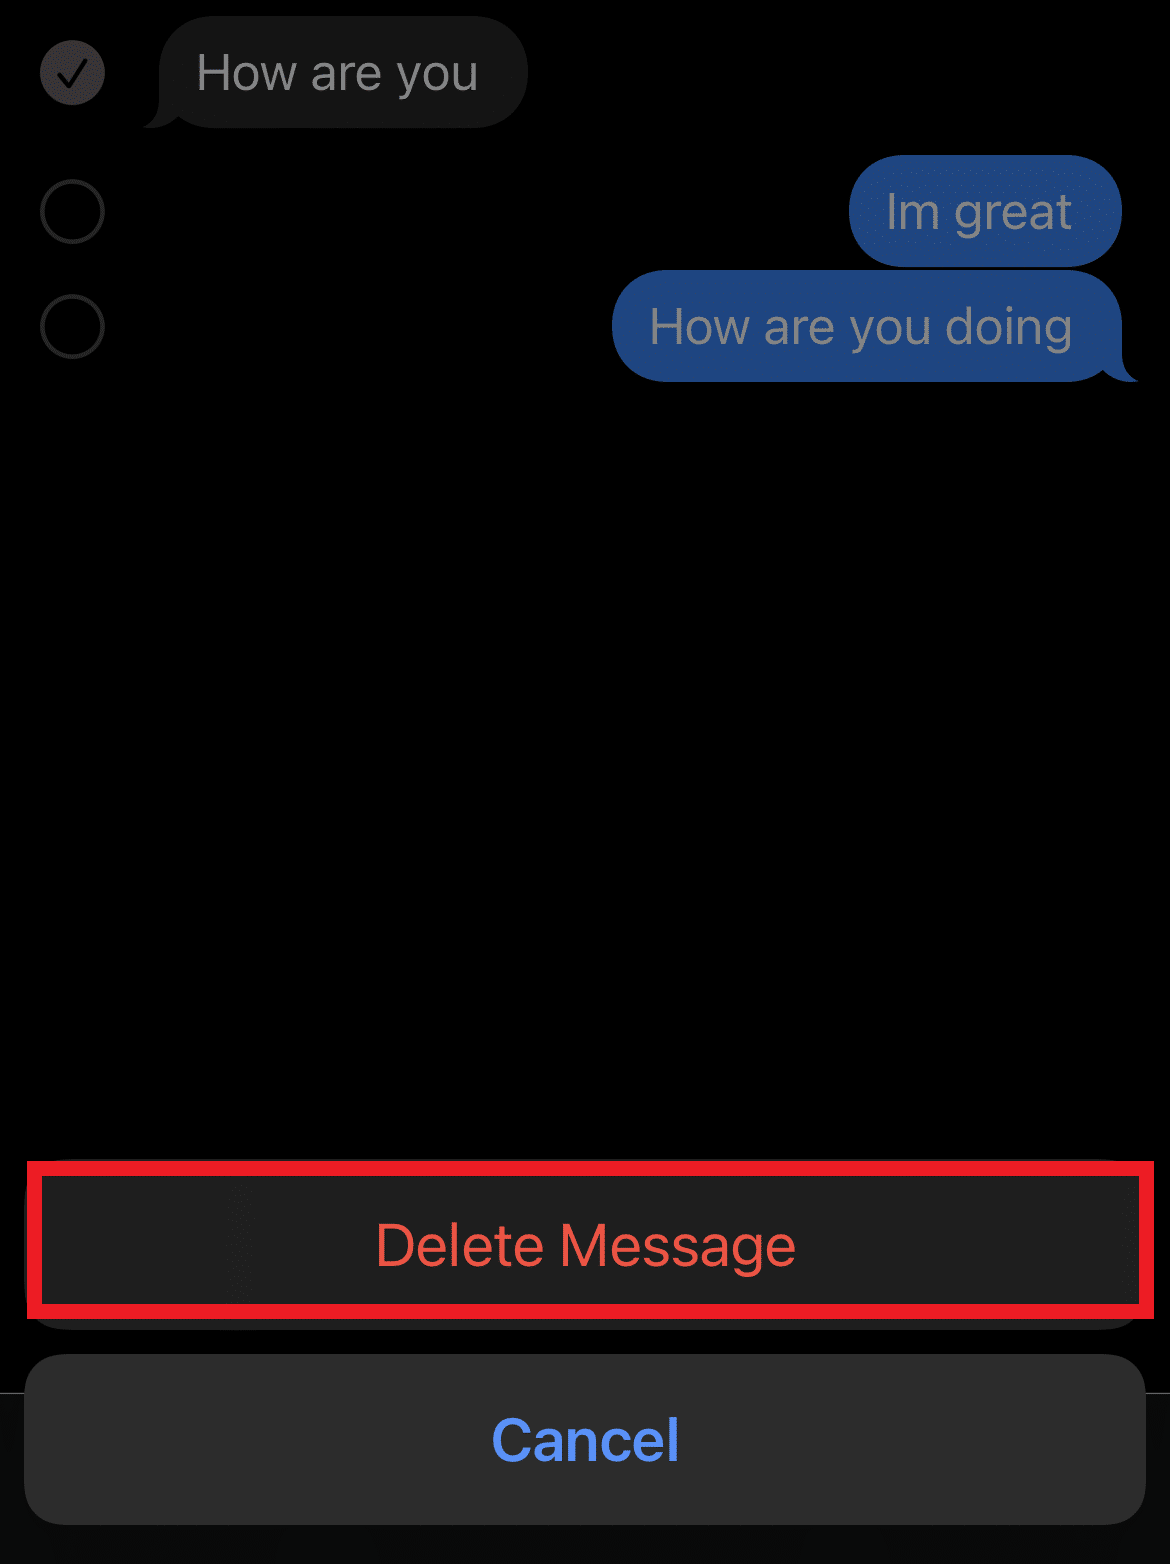 Tap on the Delete Message option to confirm the deletion